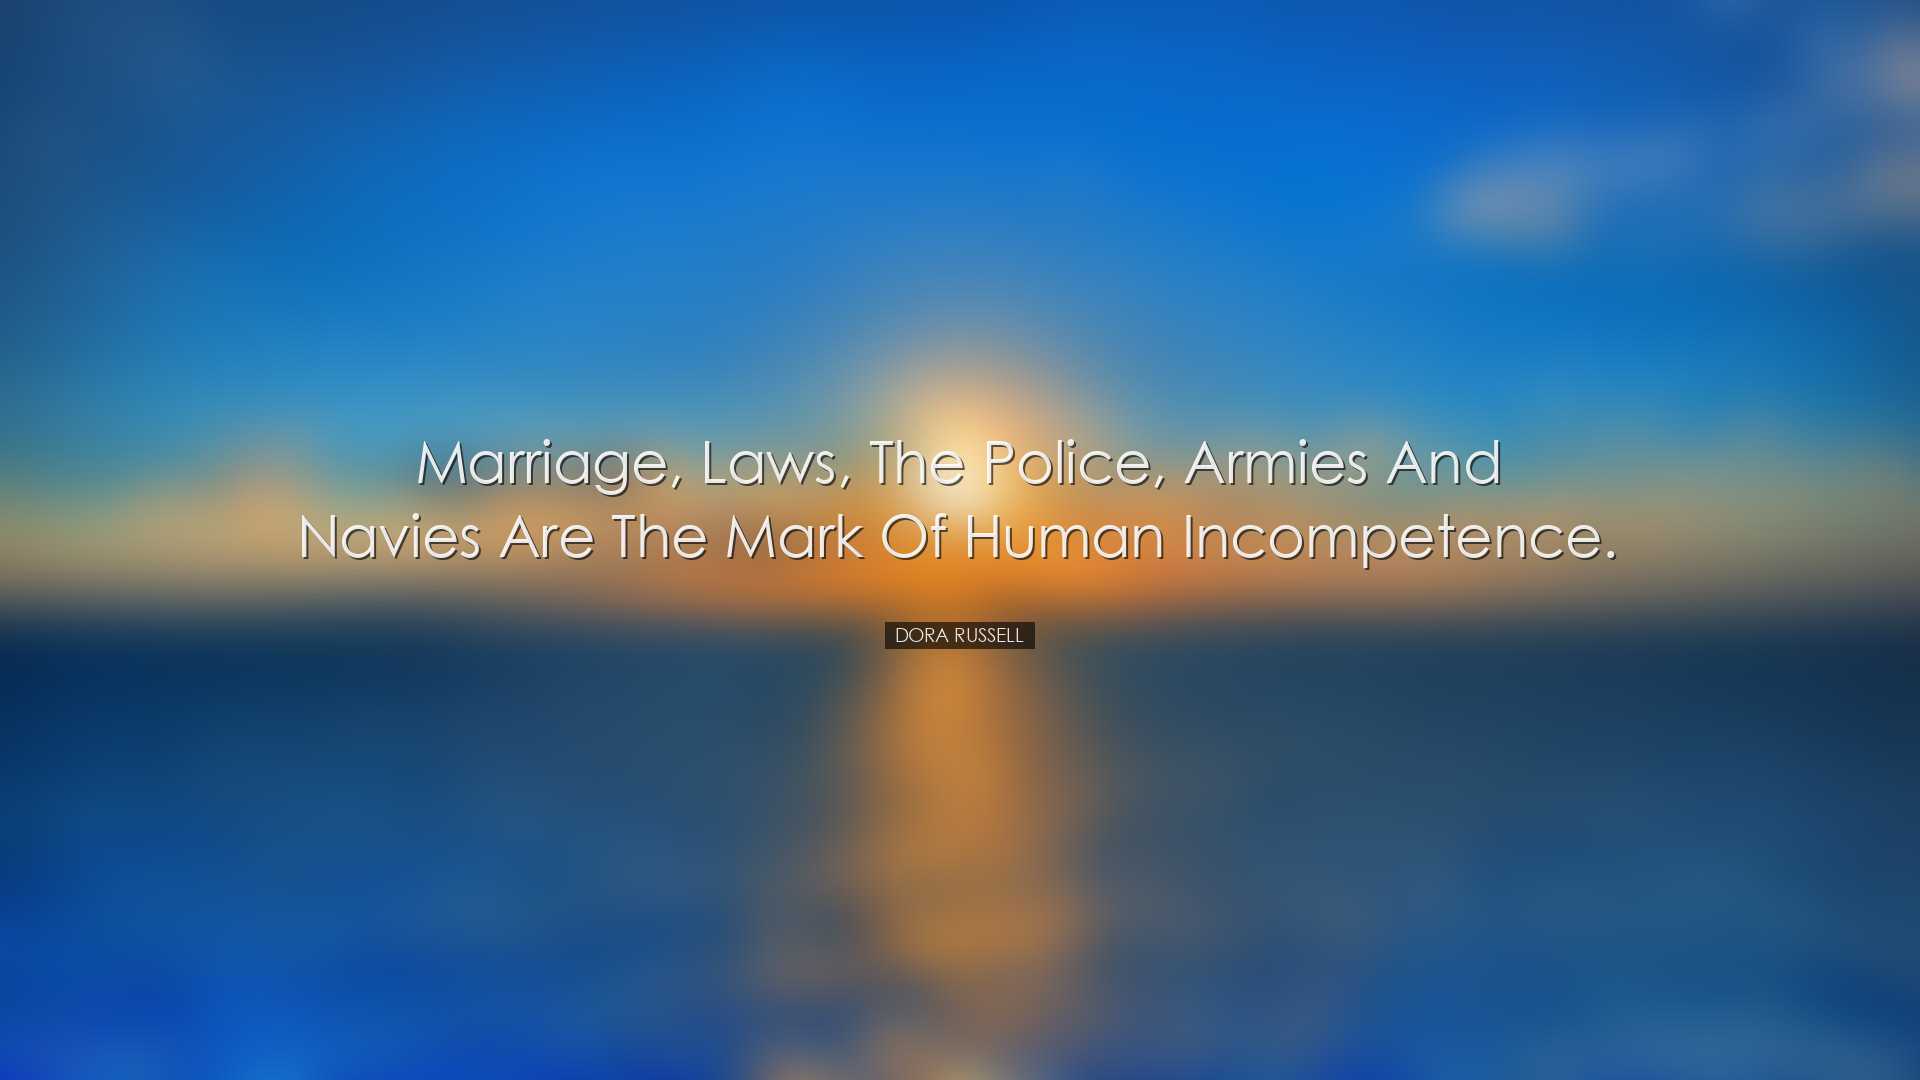 Marriage, laws, the police, armies and navies are the mark of huma